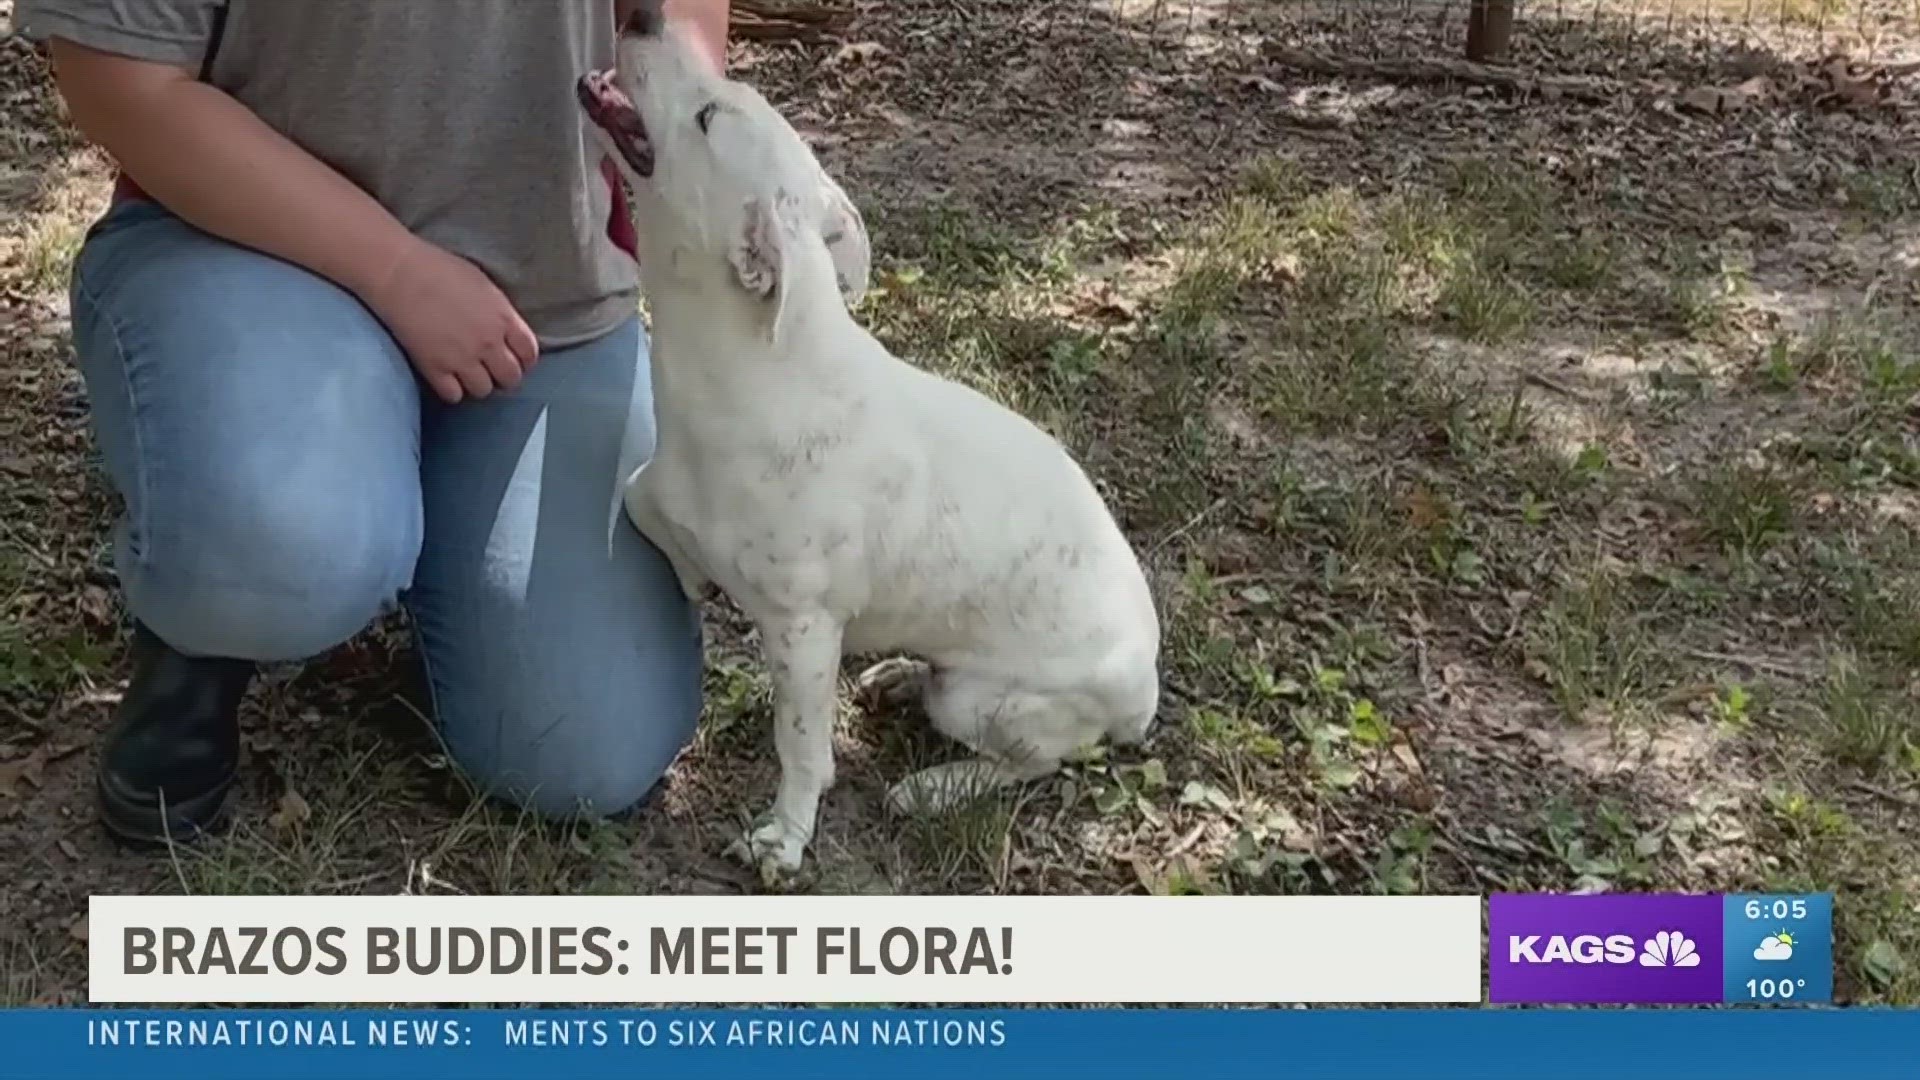 This week's featured Brazos Buddy is Flora, a one year-old mixed breed dog that's looking to be adopted.